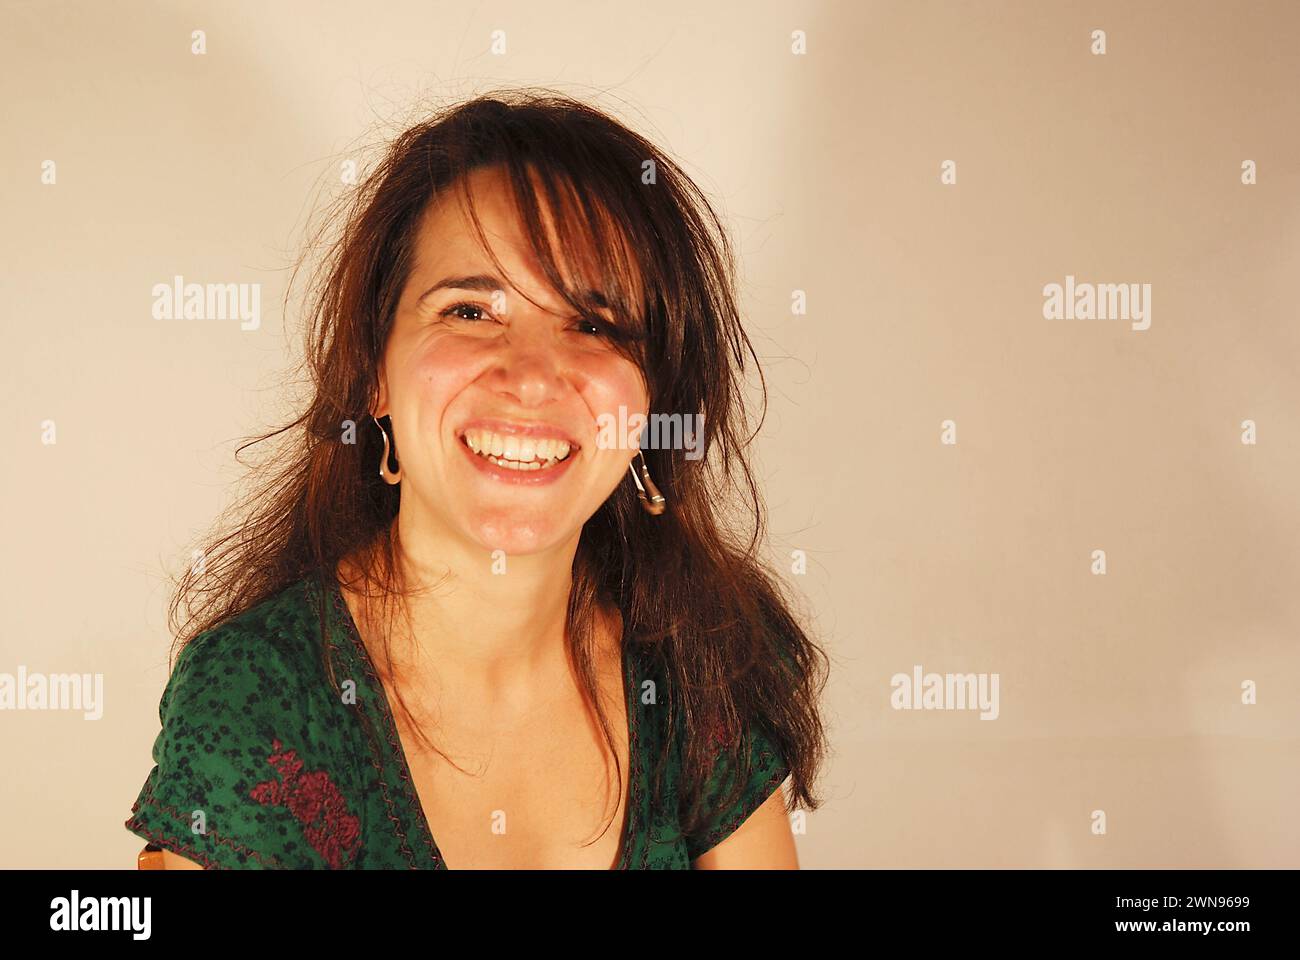 Portrait of young woman laughing. Stock Photo